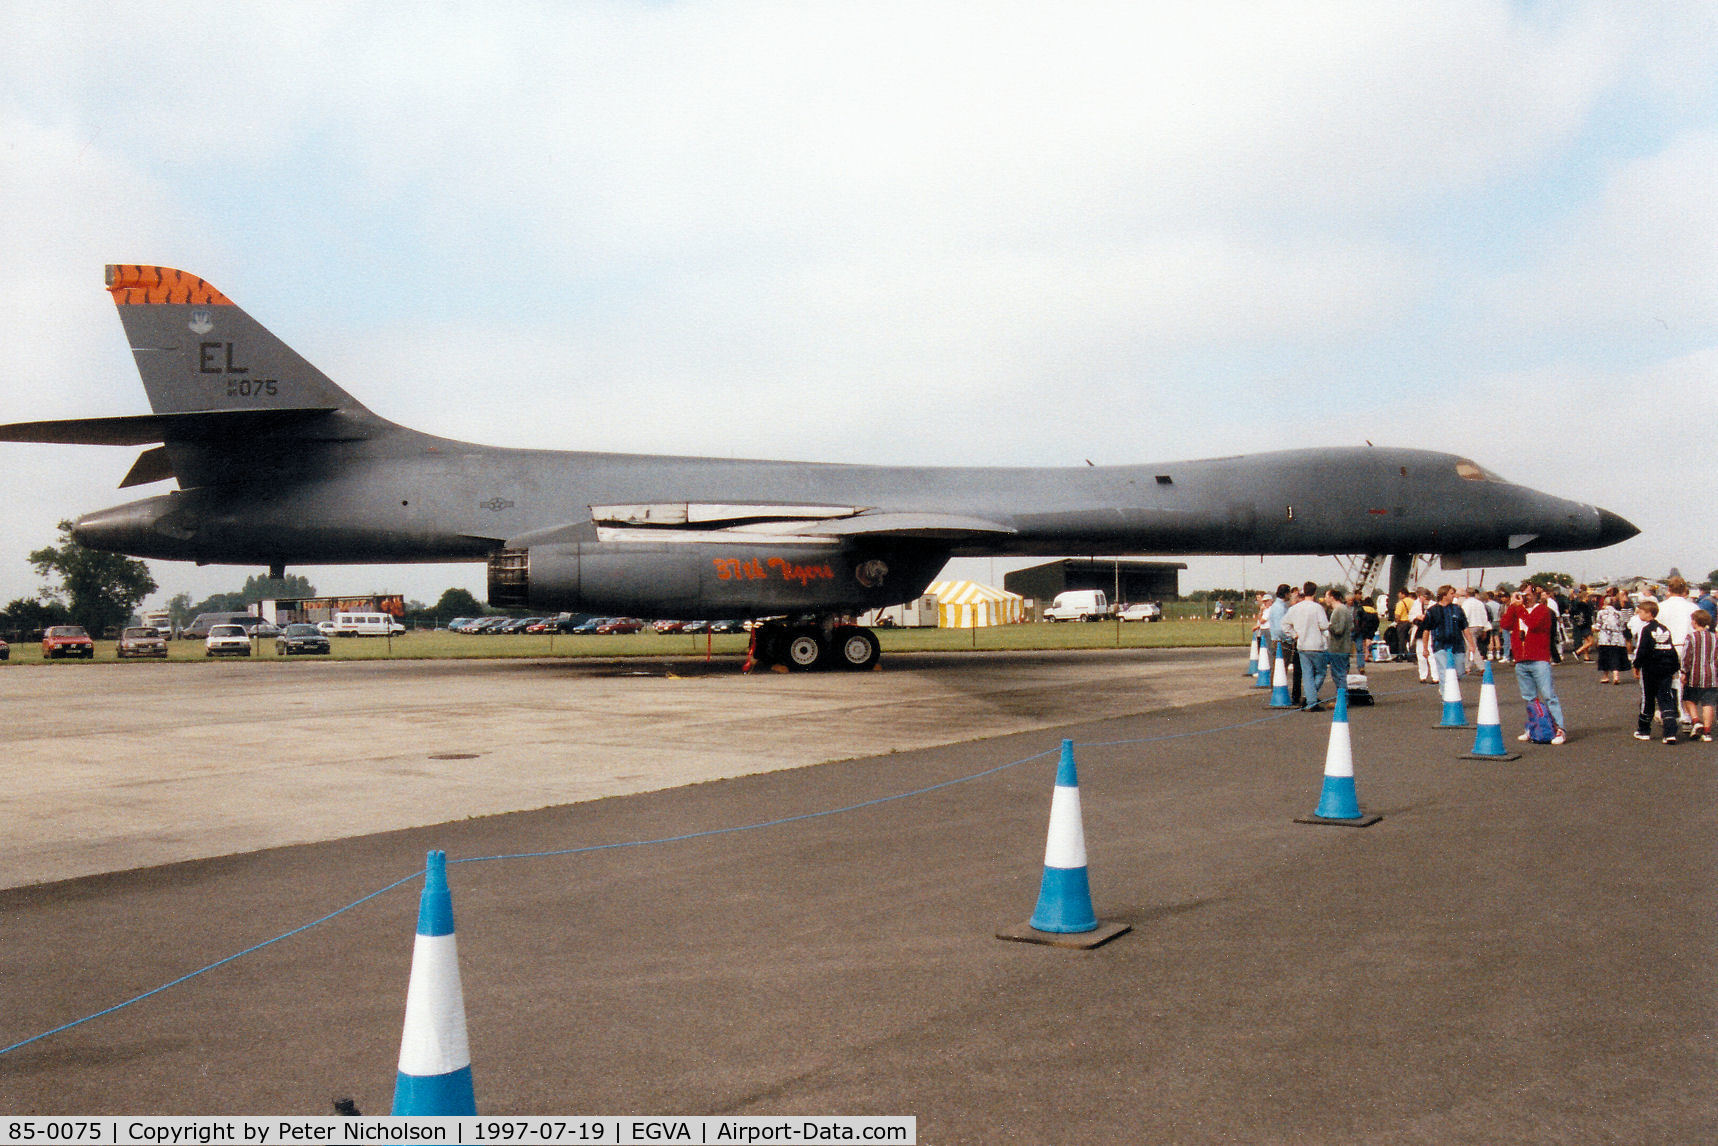 85-0075, 1985 Rockwell B-1B Lancer C/N 35, B-1B Lancer, callsign Tiger 01, of 37th Bomb Squadron/28th Bombardment Wing on display at the 1997 Intnl Air Tattoo at RAF Fairford.